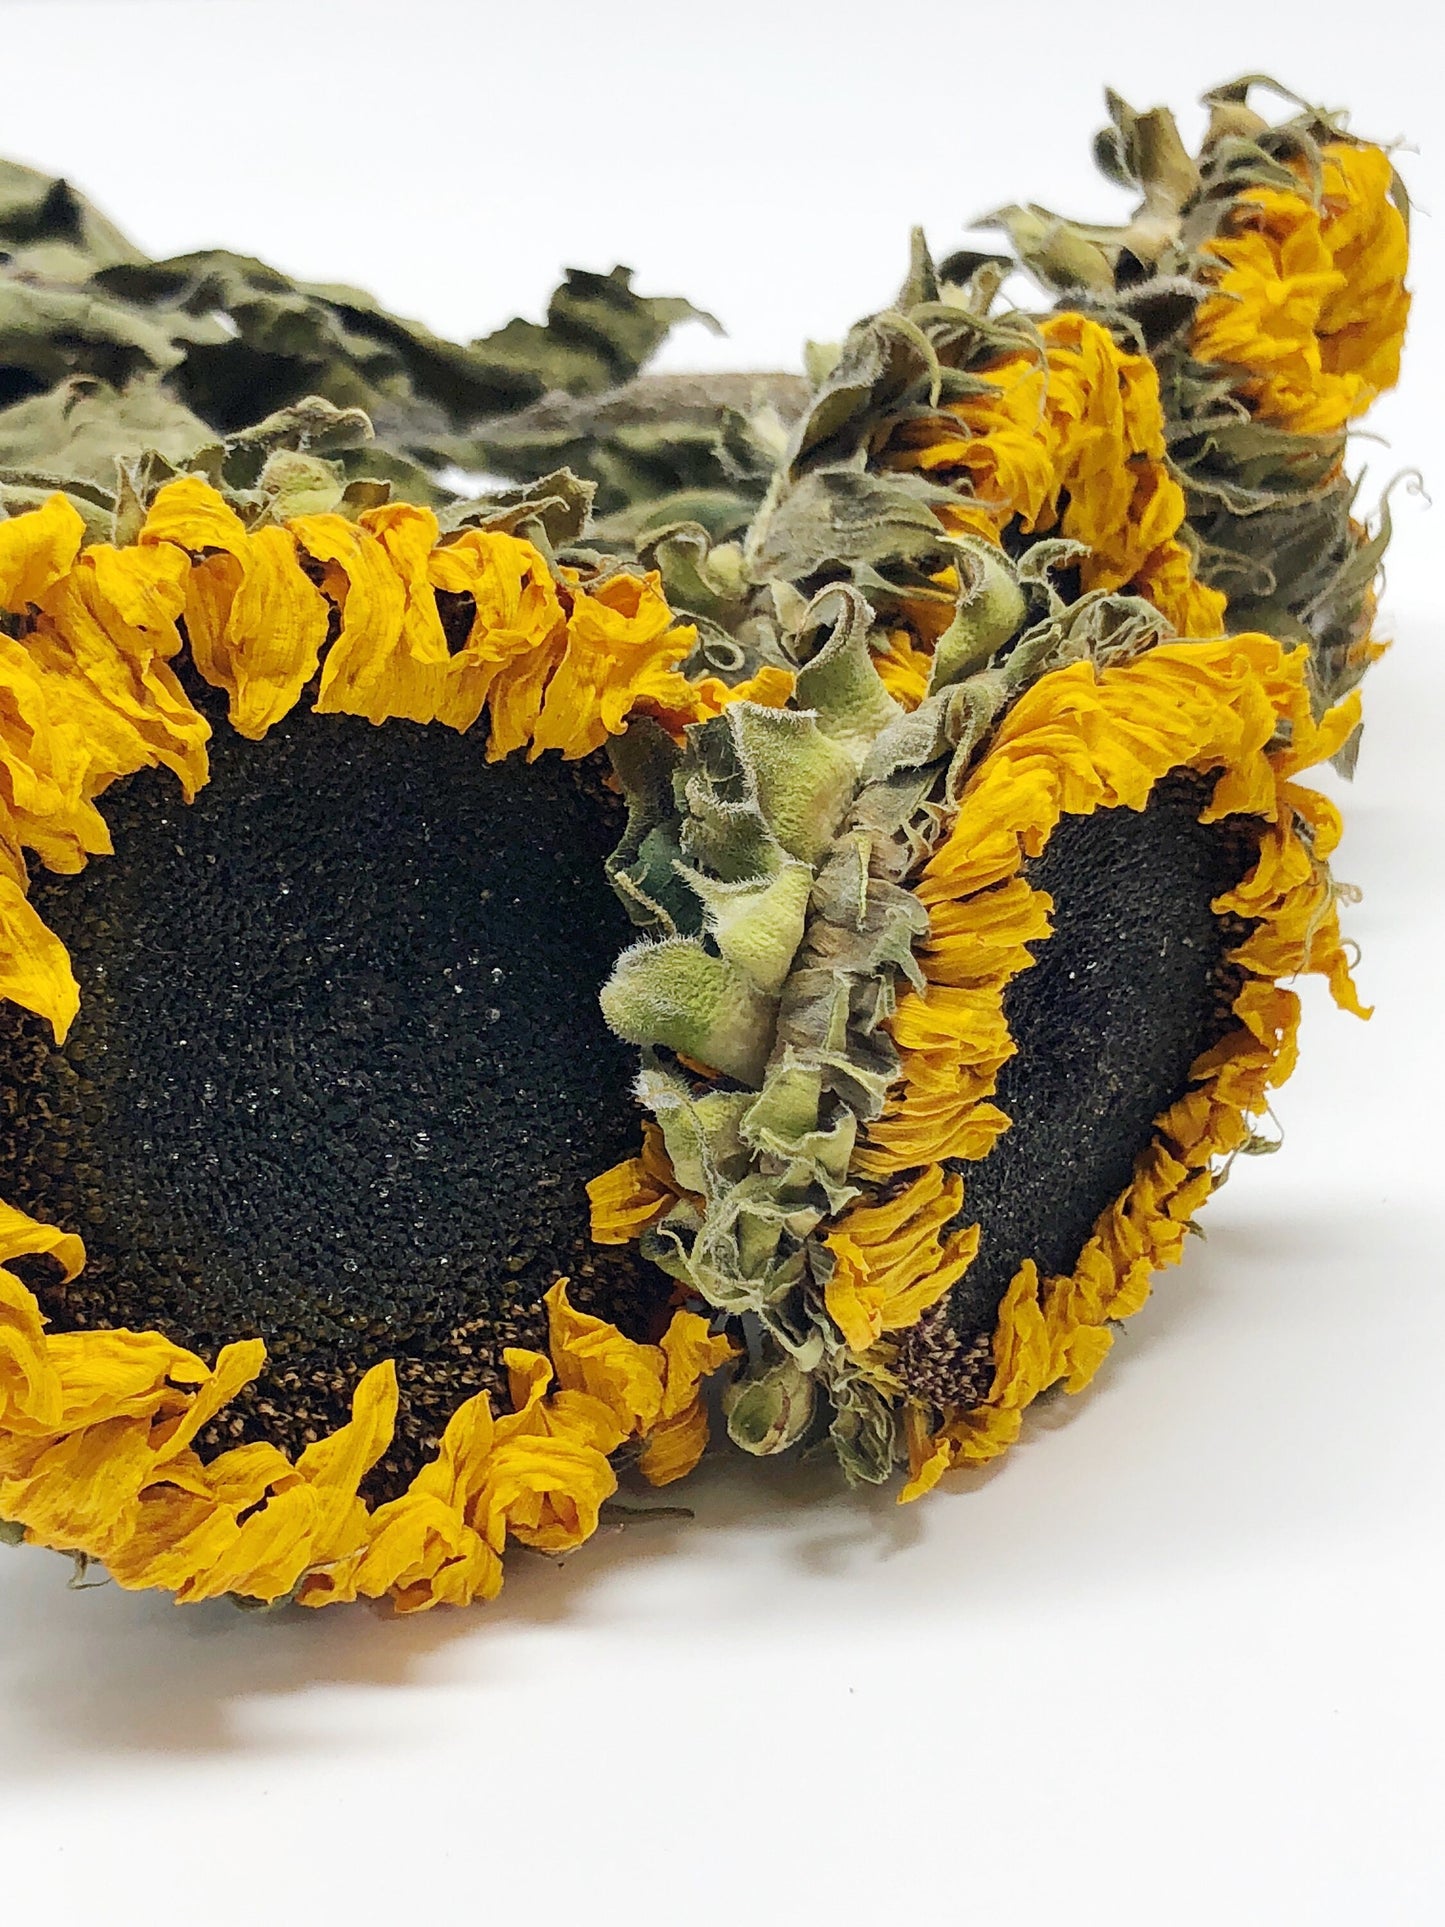 Dried Sunflowers, Sunflowers, Yellow, Orange, Summer Flowers, Preserved Flowers, Wedding Bouquet, Country, Dried Flowers, Rustic, Helianthus